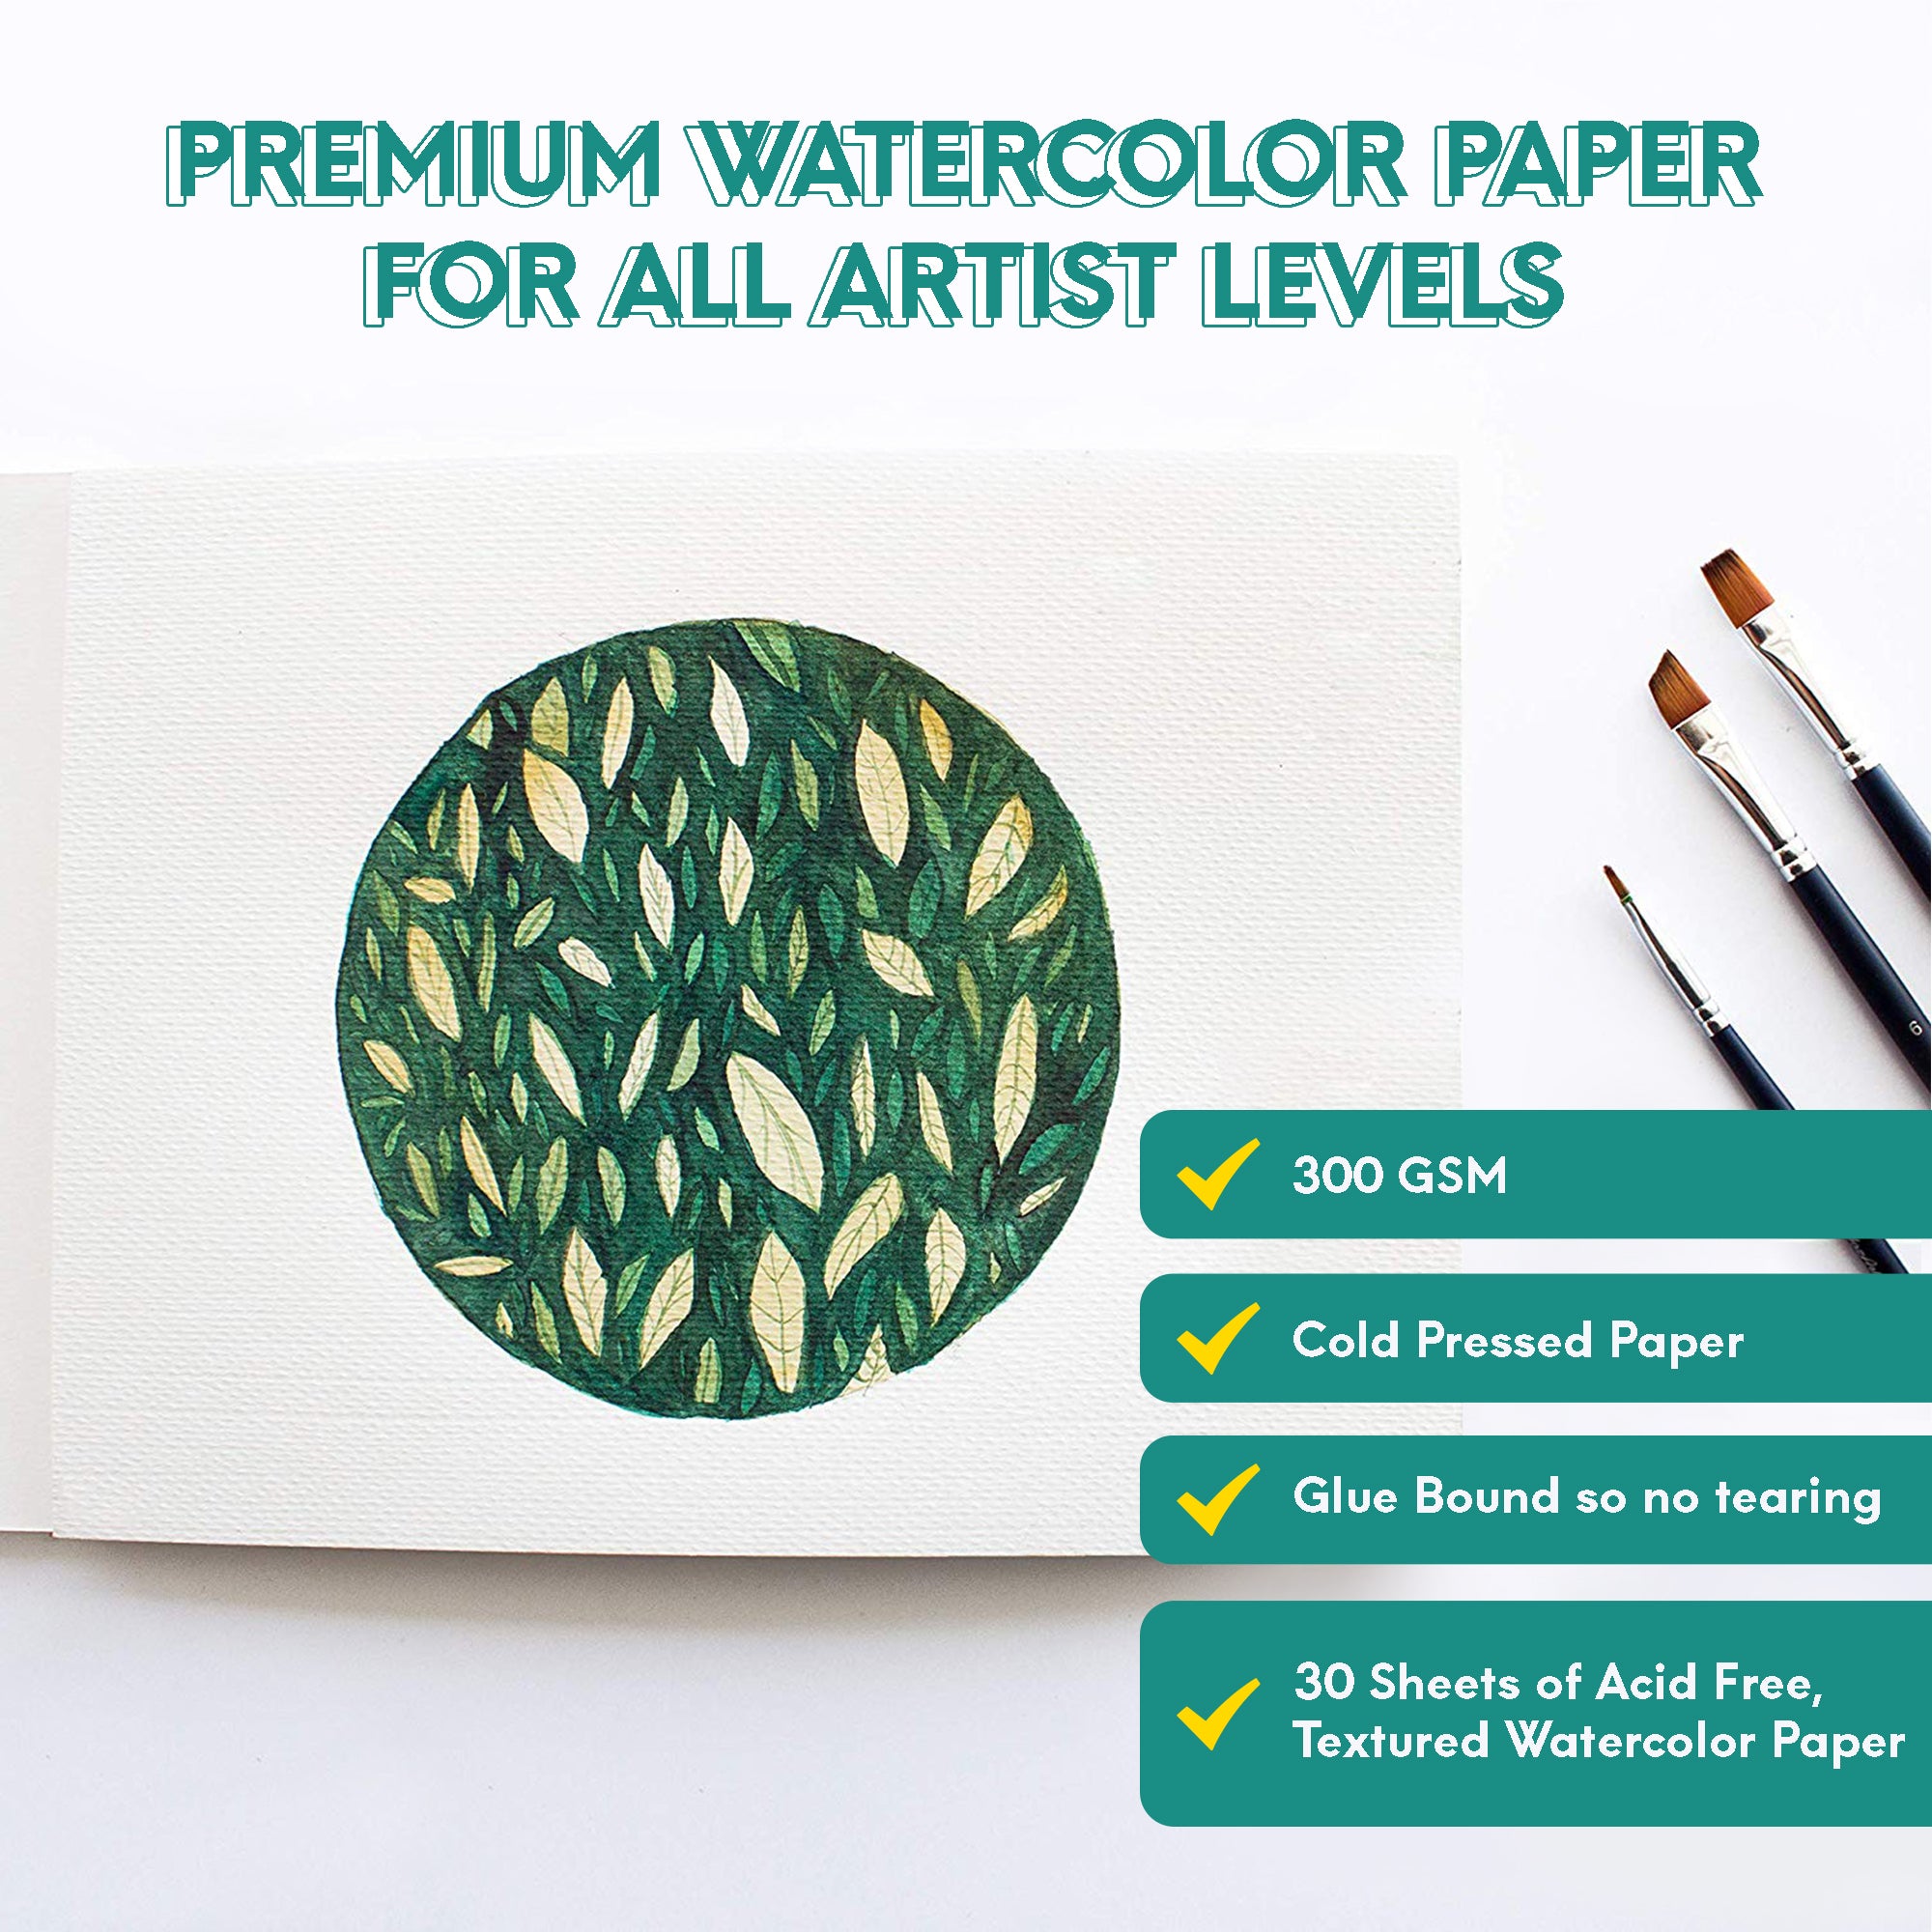 Watercolor Pad 9x12 Premium Cold Pressed Acid Free Watercolor Paper (30 Sheets) Perfect for Blending and Layering - for Professionals and Students